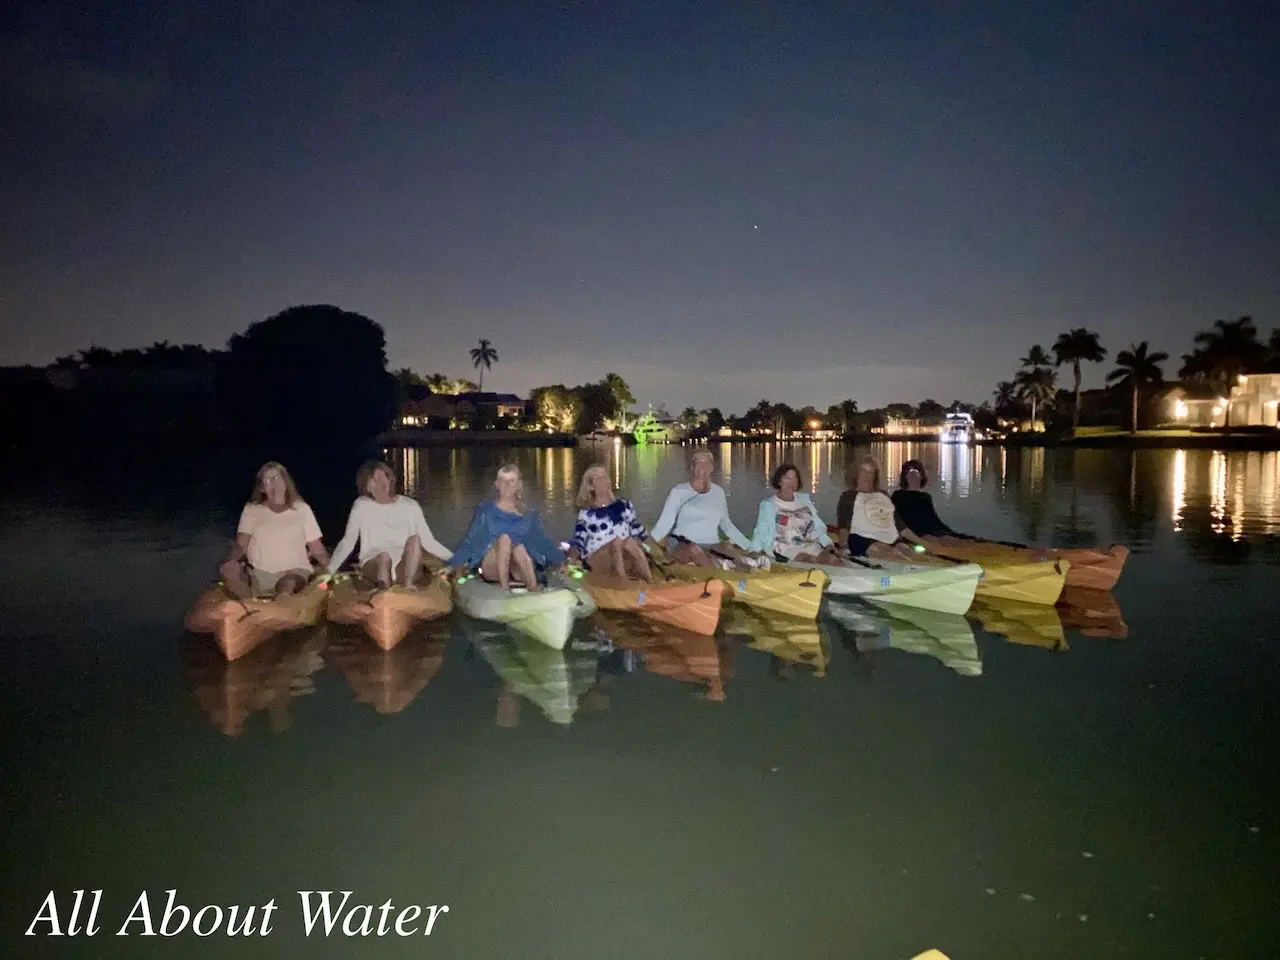 Six people kayaking at night in a canal.